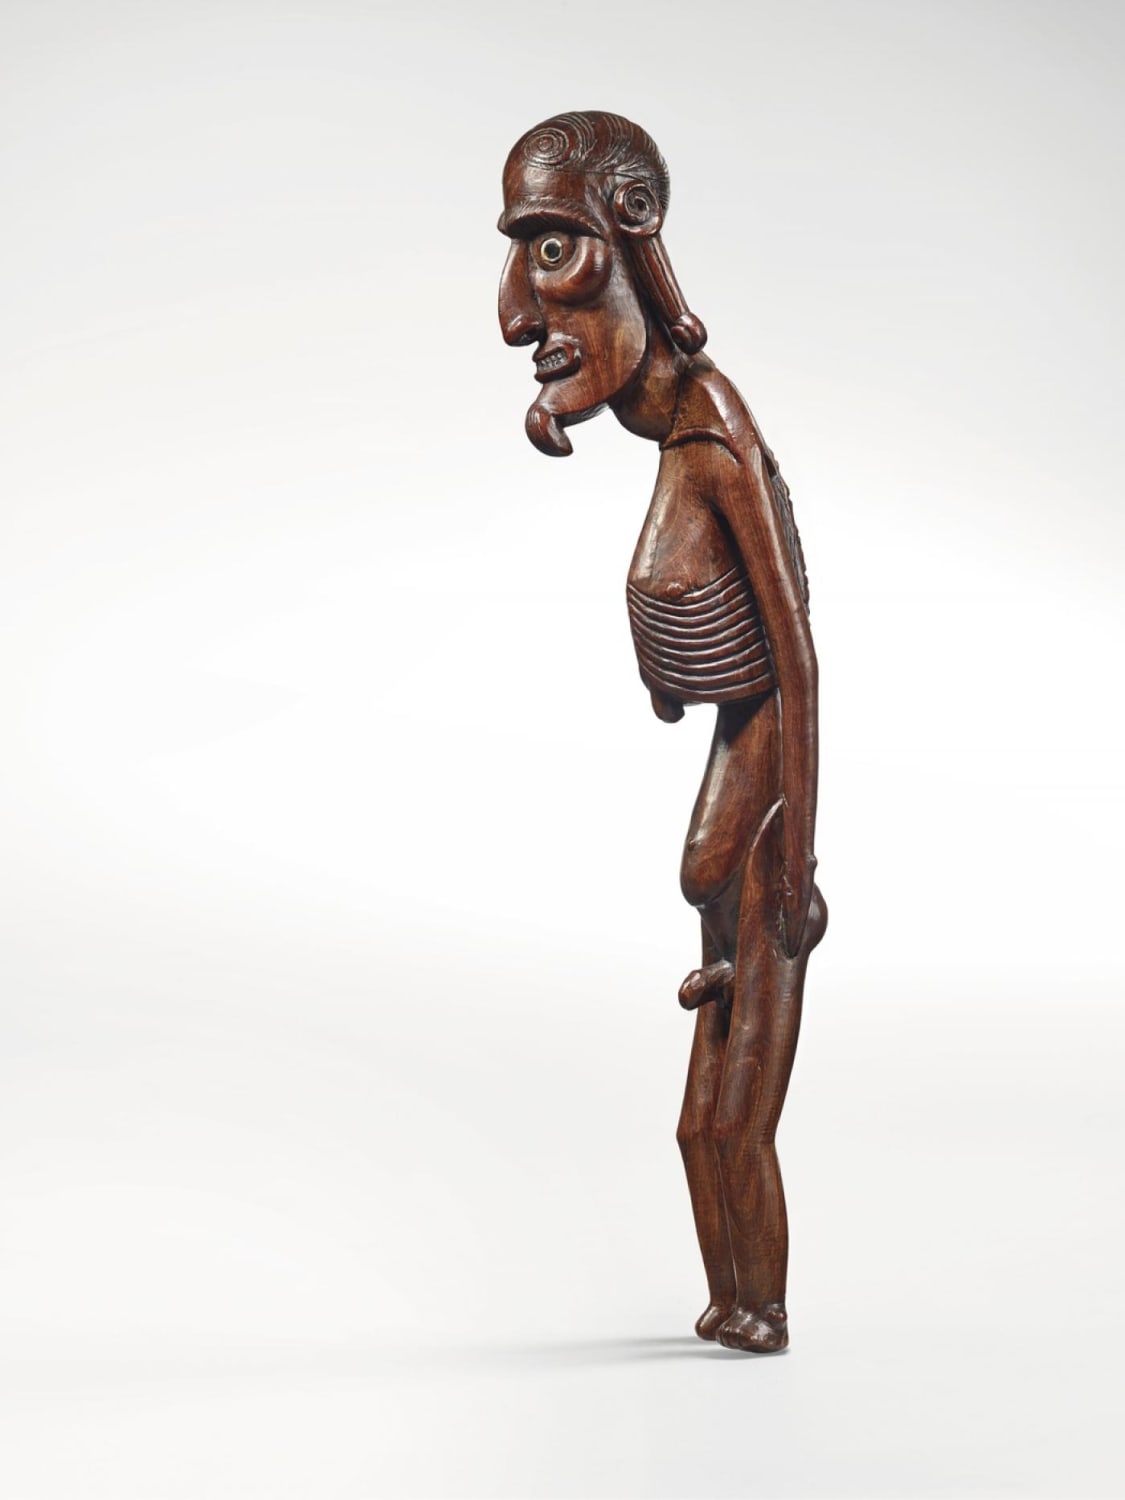 A mo‘ai kavakava figure from Easter Island, carved in toromiro (a species of an endemic flowering tree). Rapa Nui culture, late 18th century-early 19th century, sold at christie's in 2019